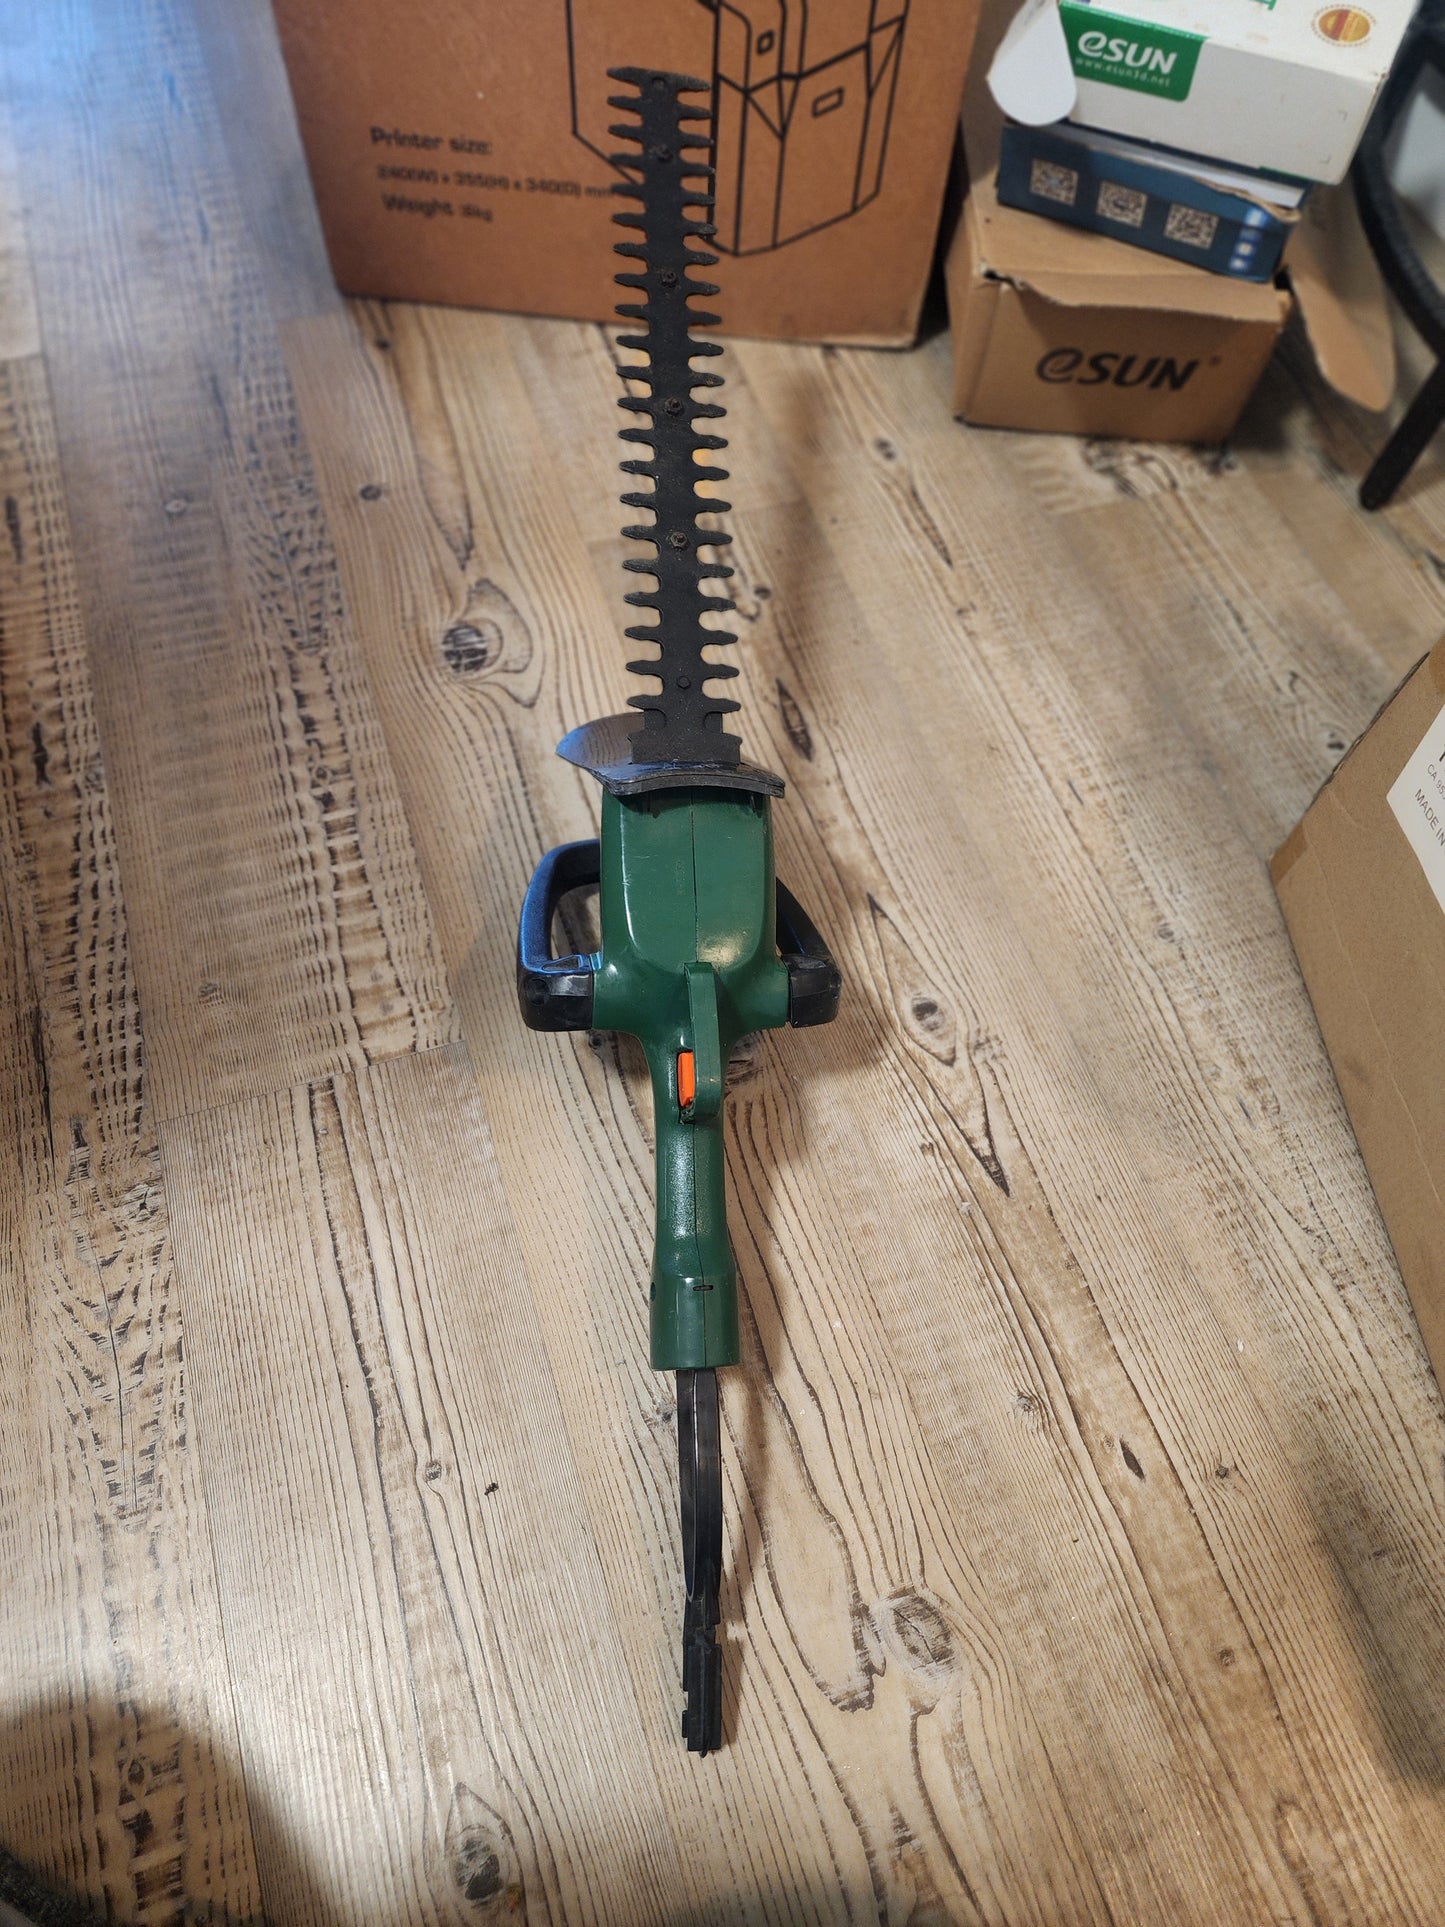 Hedge Trimmer Pre owned good condition